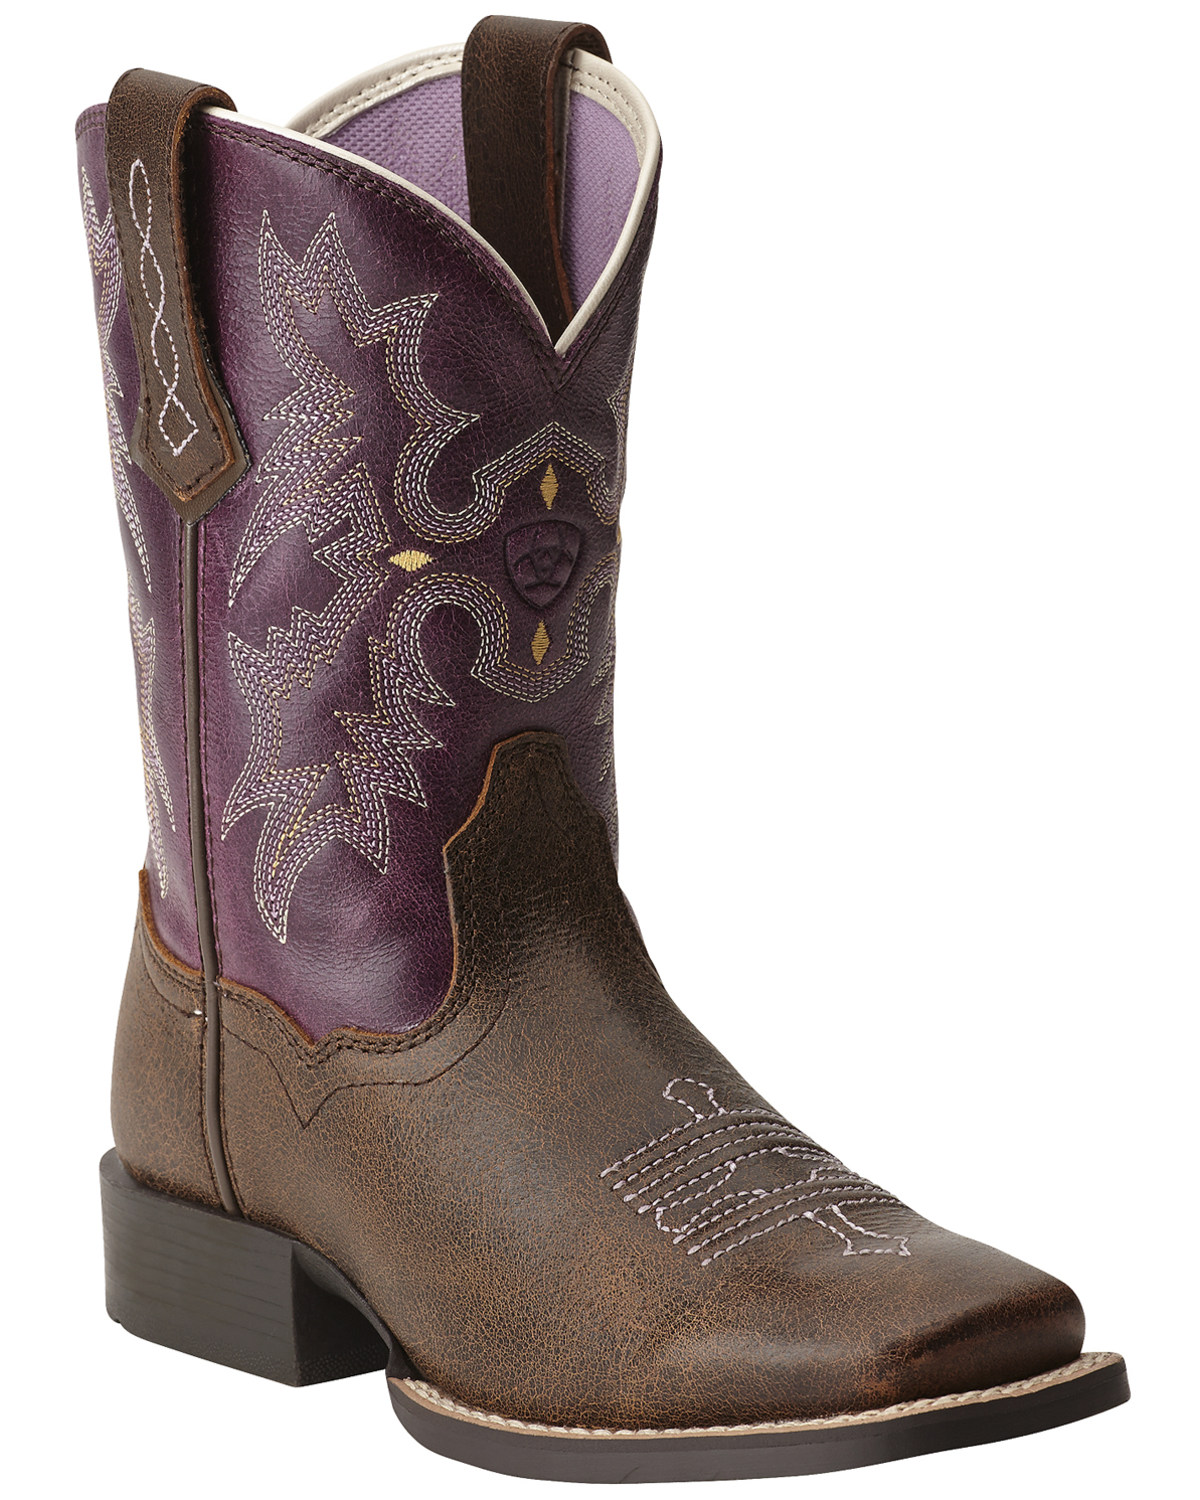 Ariat Girls' Tombstone Western Boots - Broad Square Toe